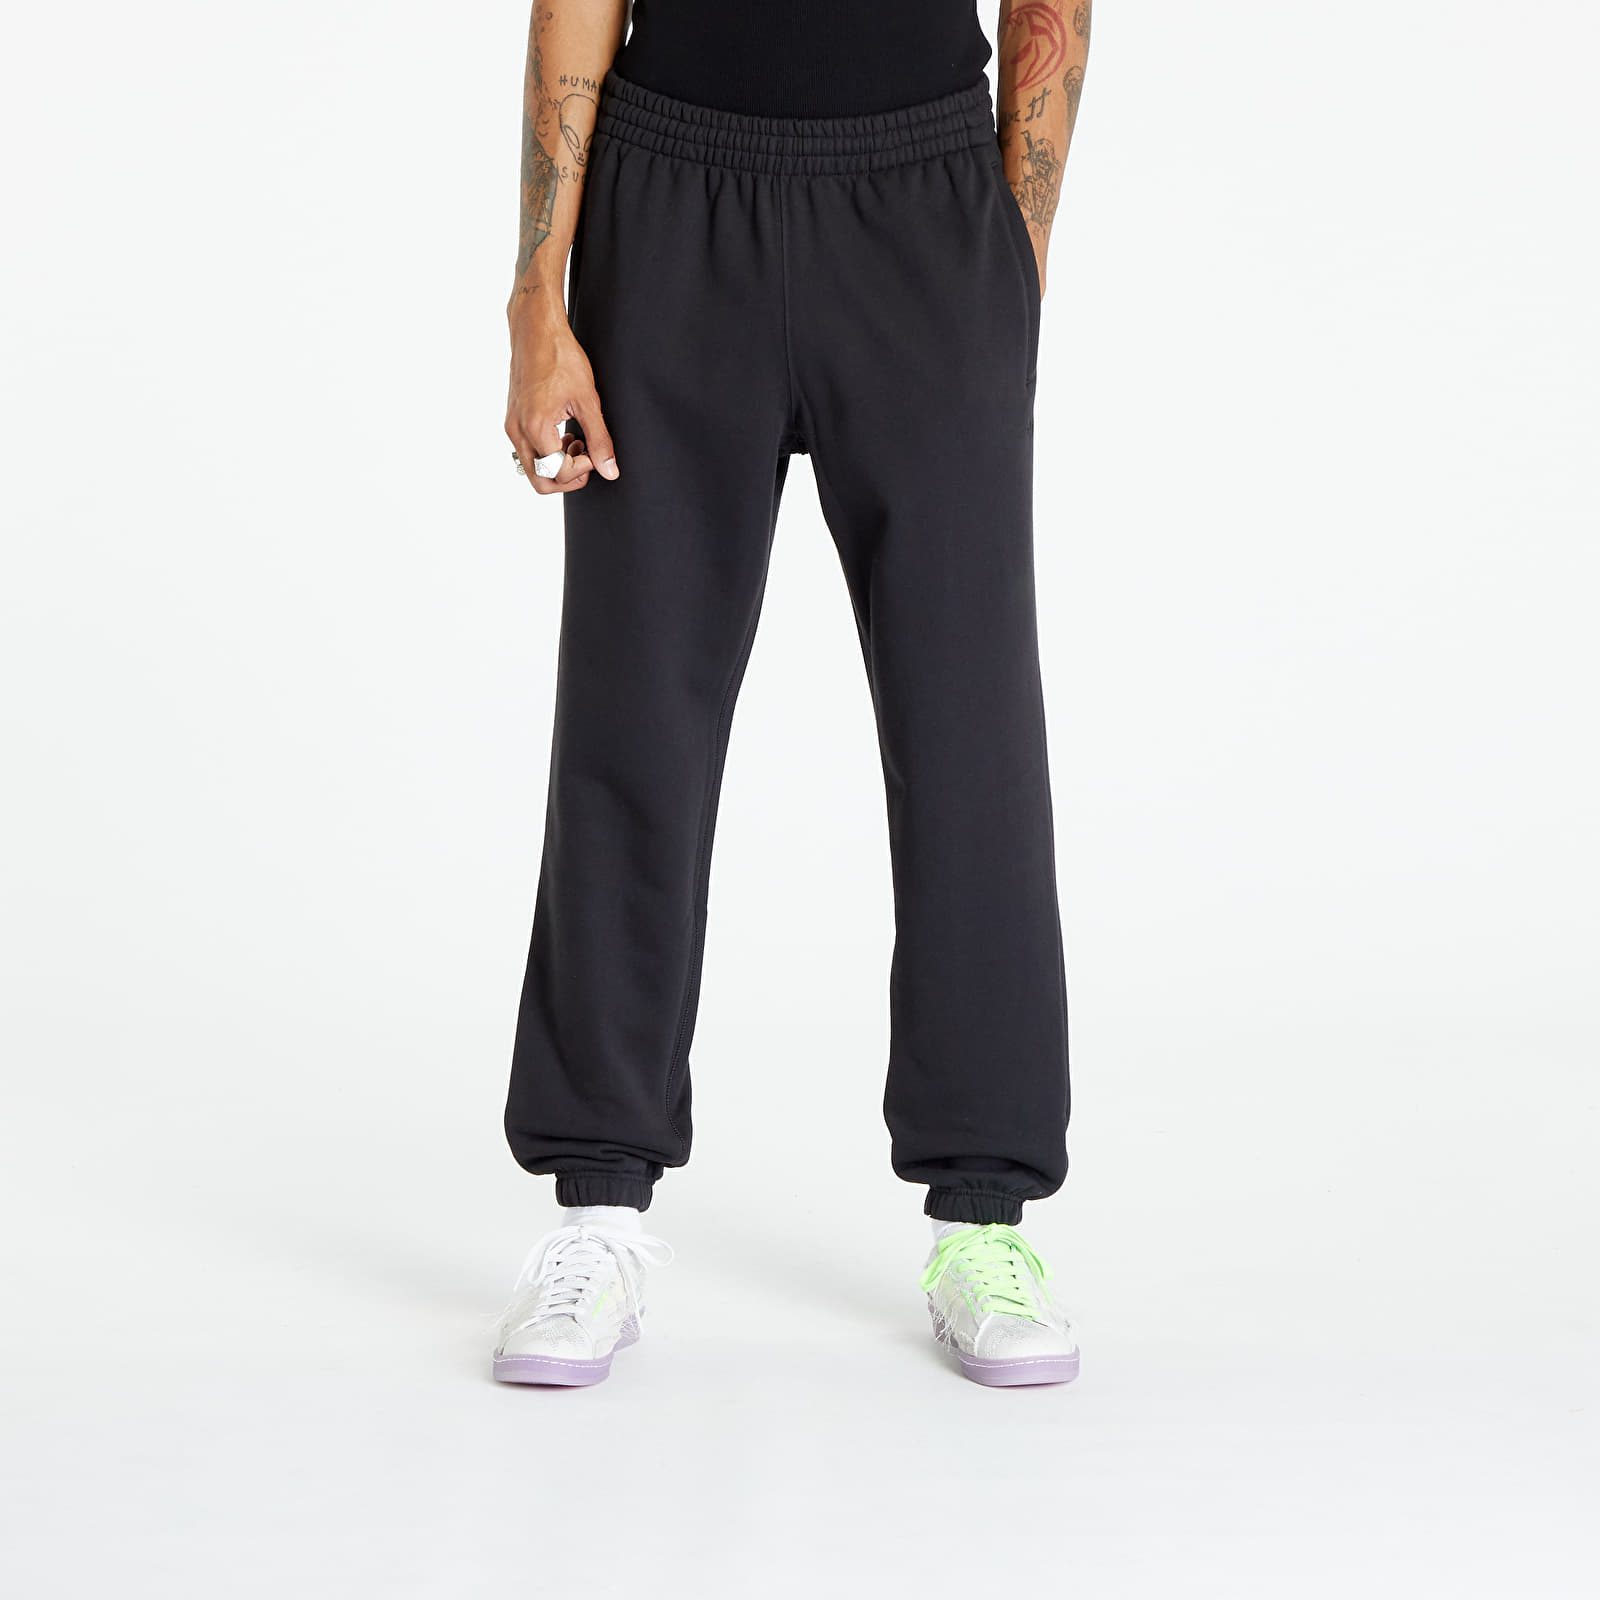 Jogger Pants adidas Adicolor Contempo French Terry Pants Black